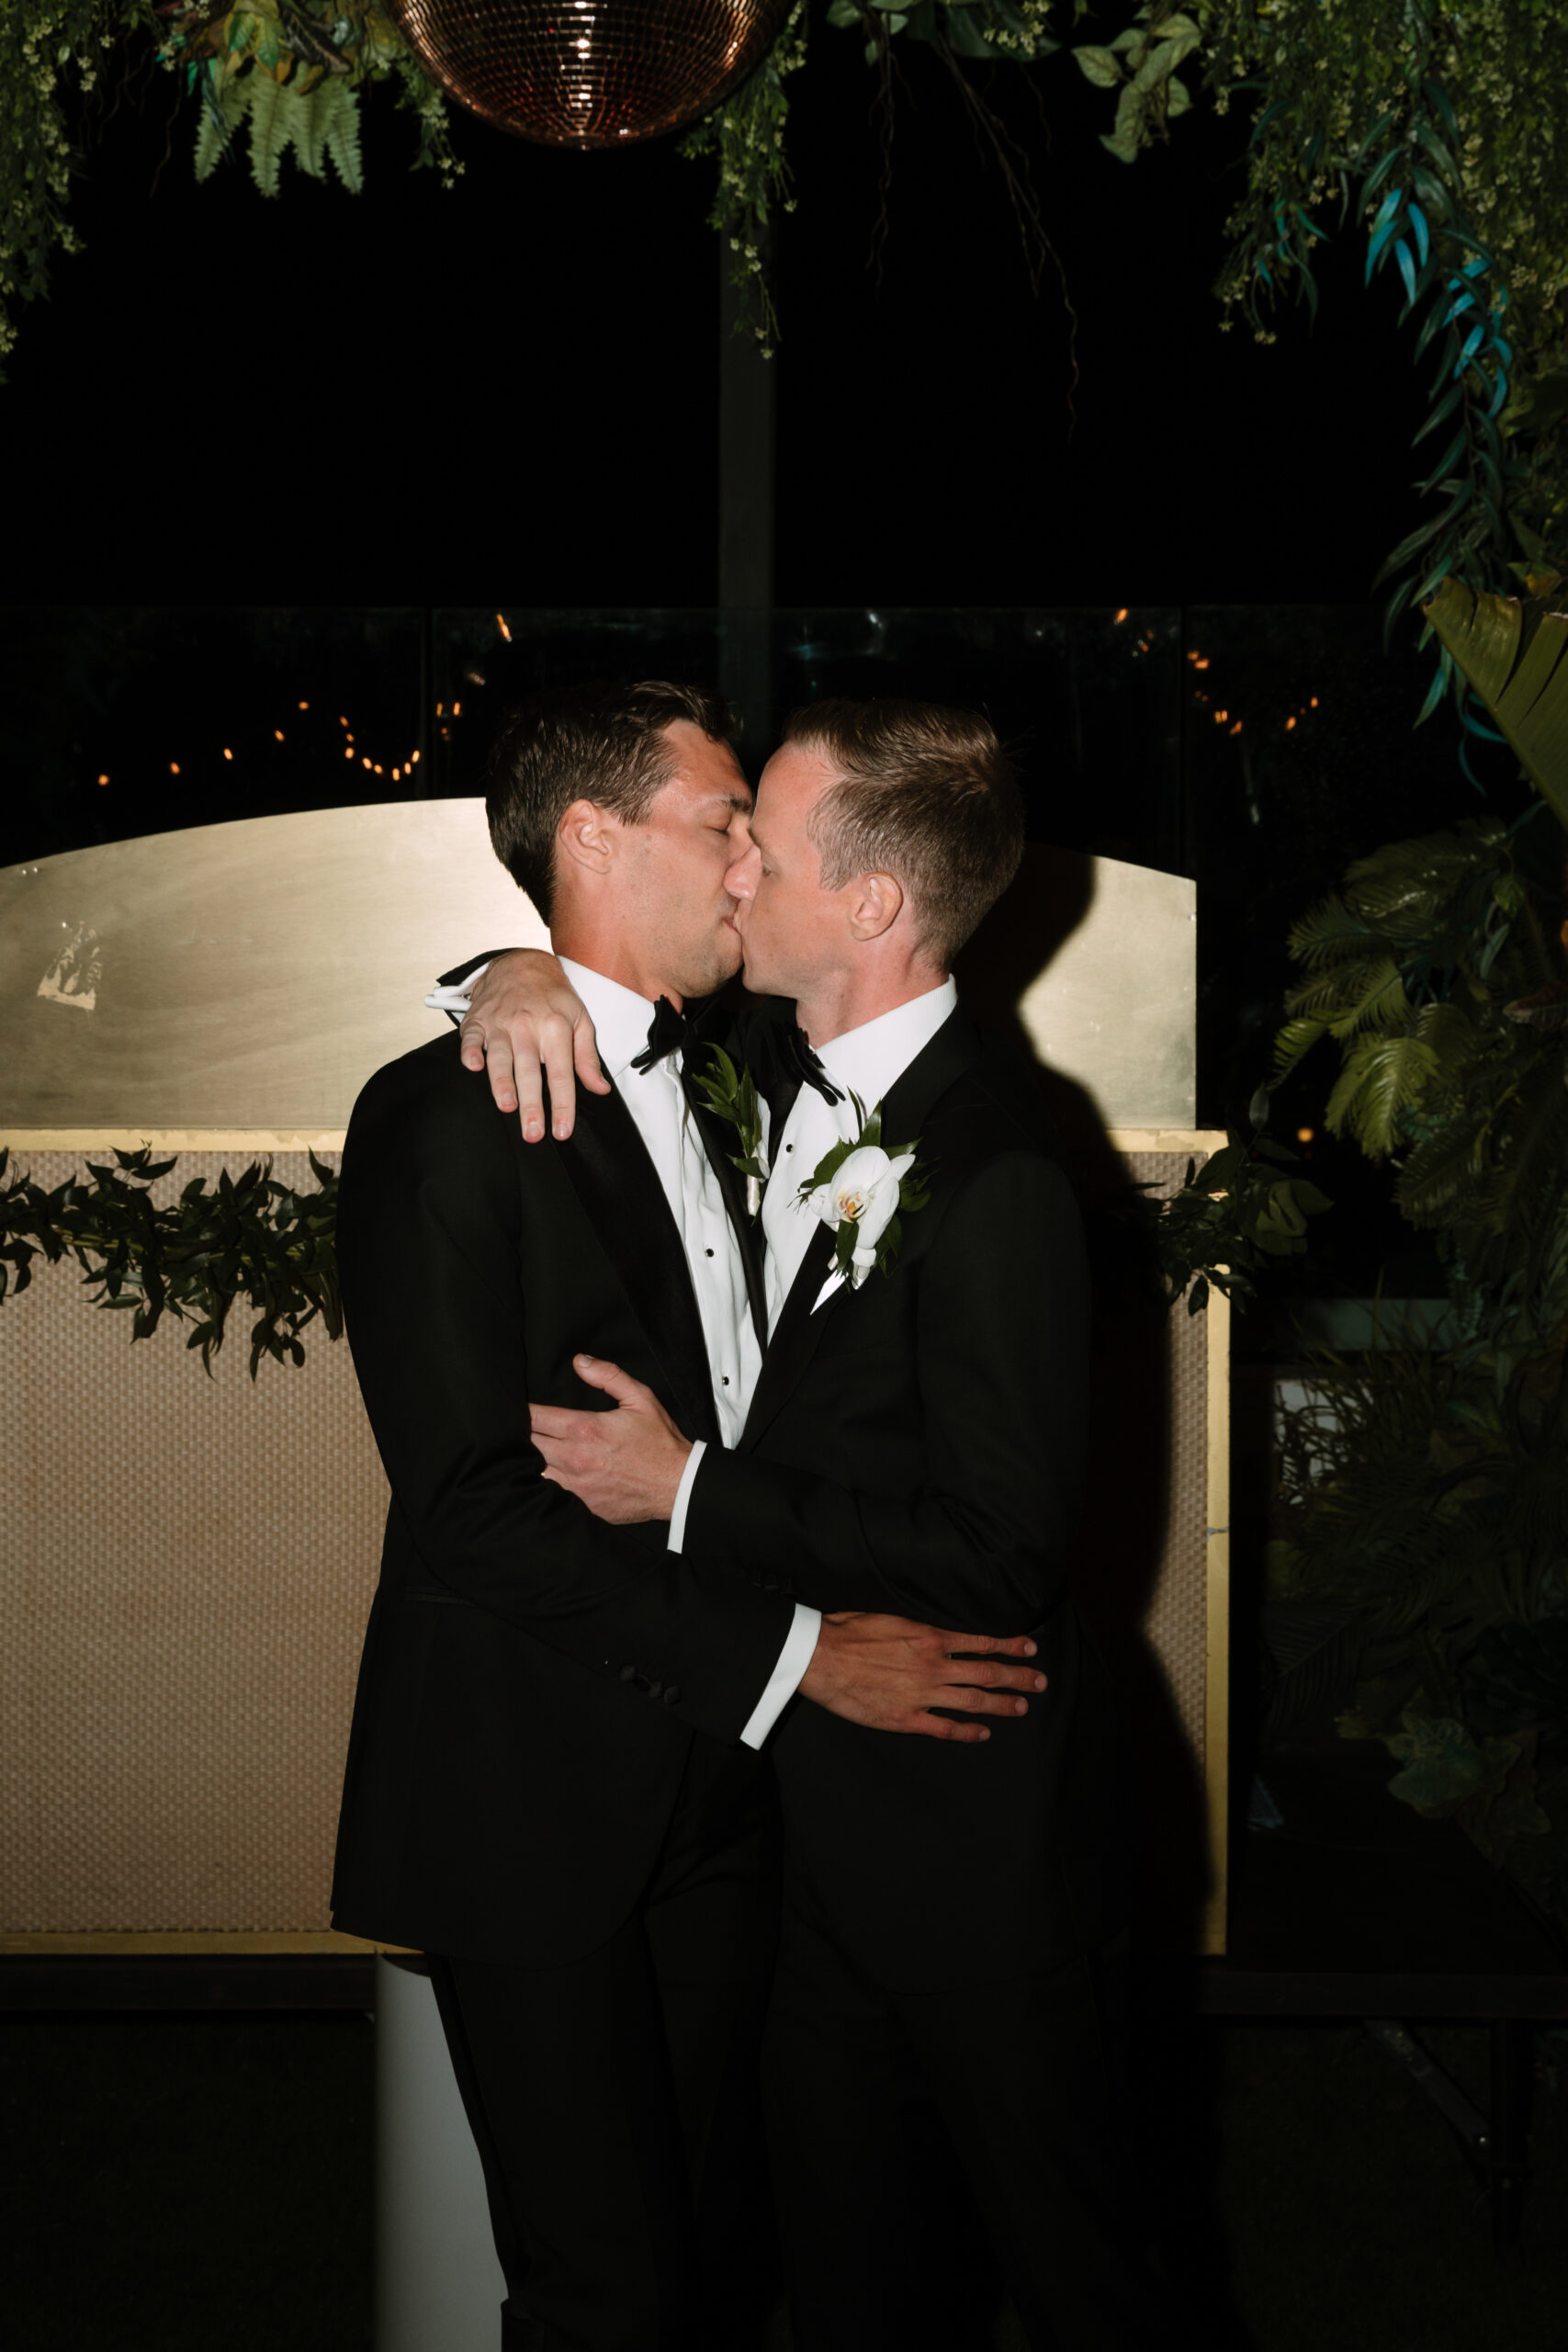 direct flash photo on Kimpton La Peer rooftop of gay grooms sharing their first kiss